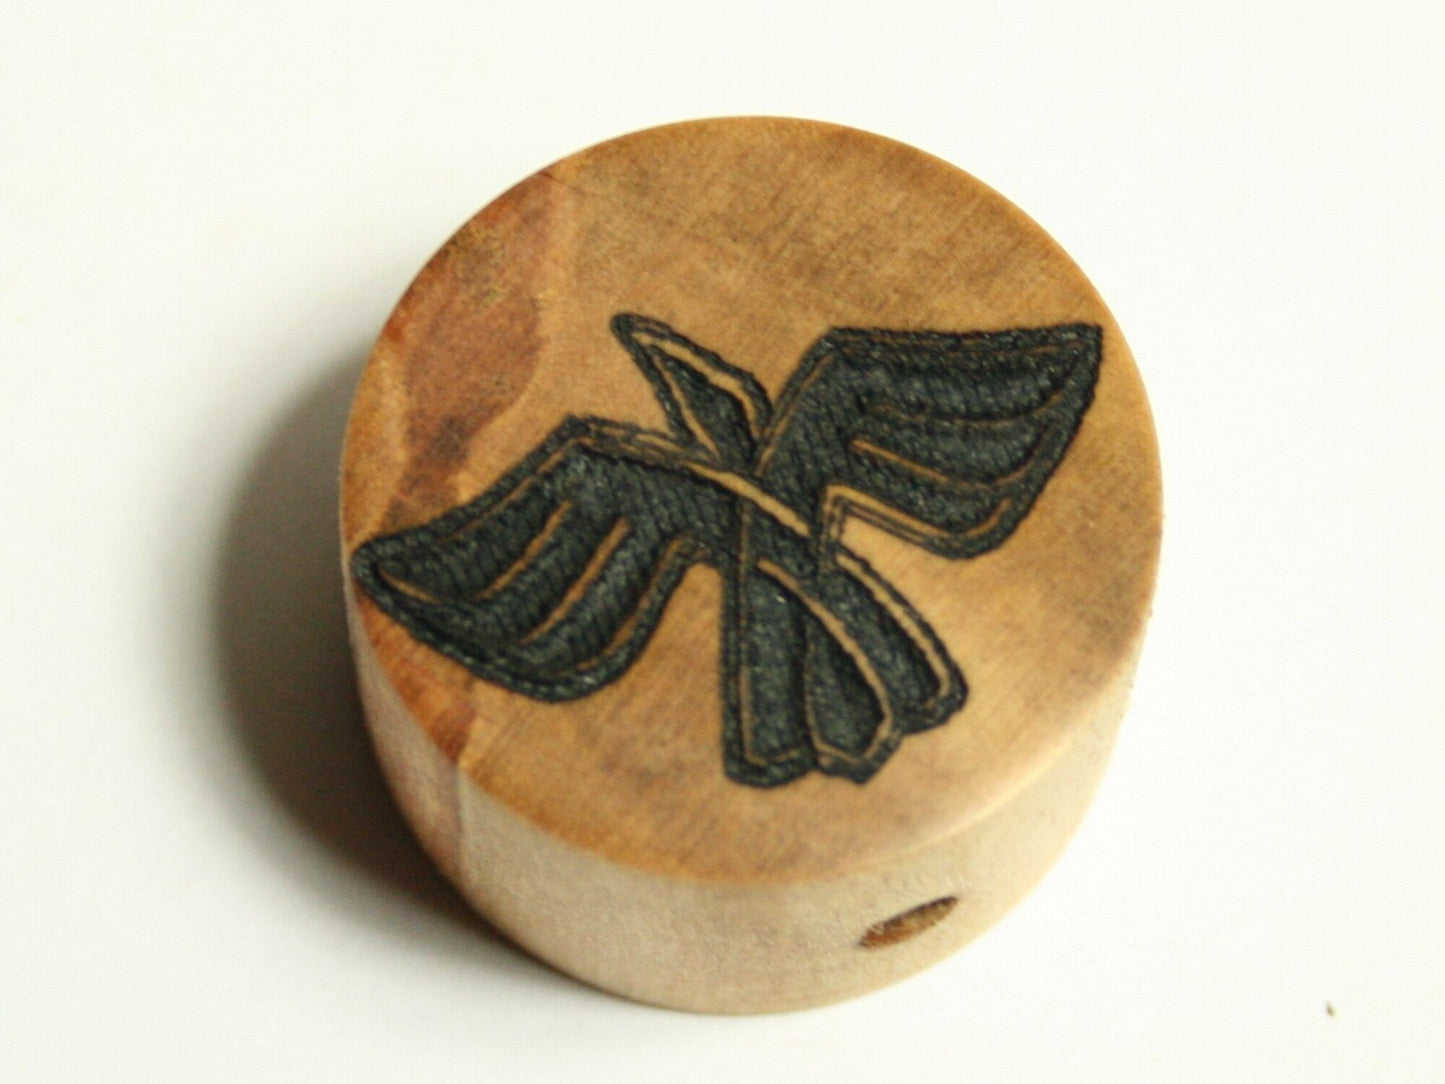 Laser Etched Guitar Knob: Spalted Maple (7/8 dia x 5/8 height)